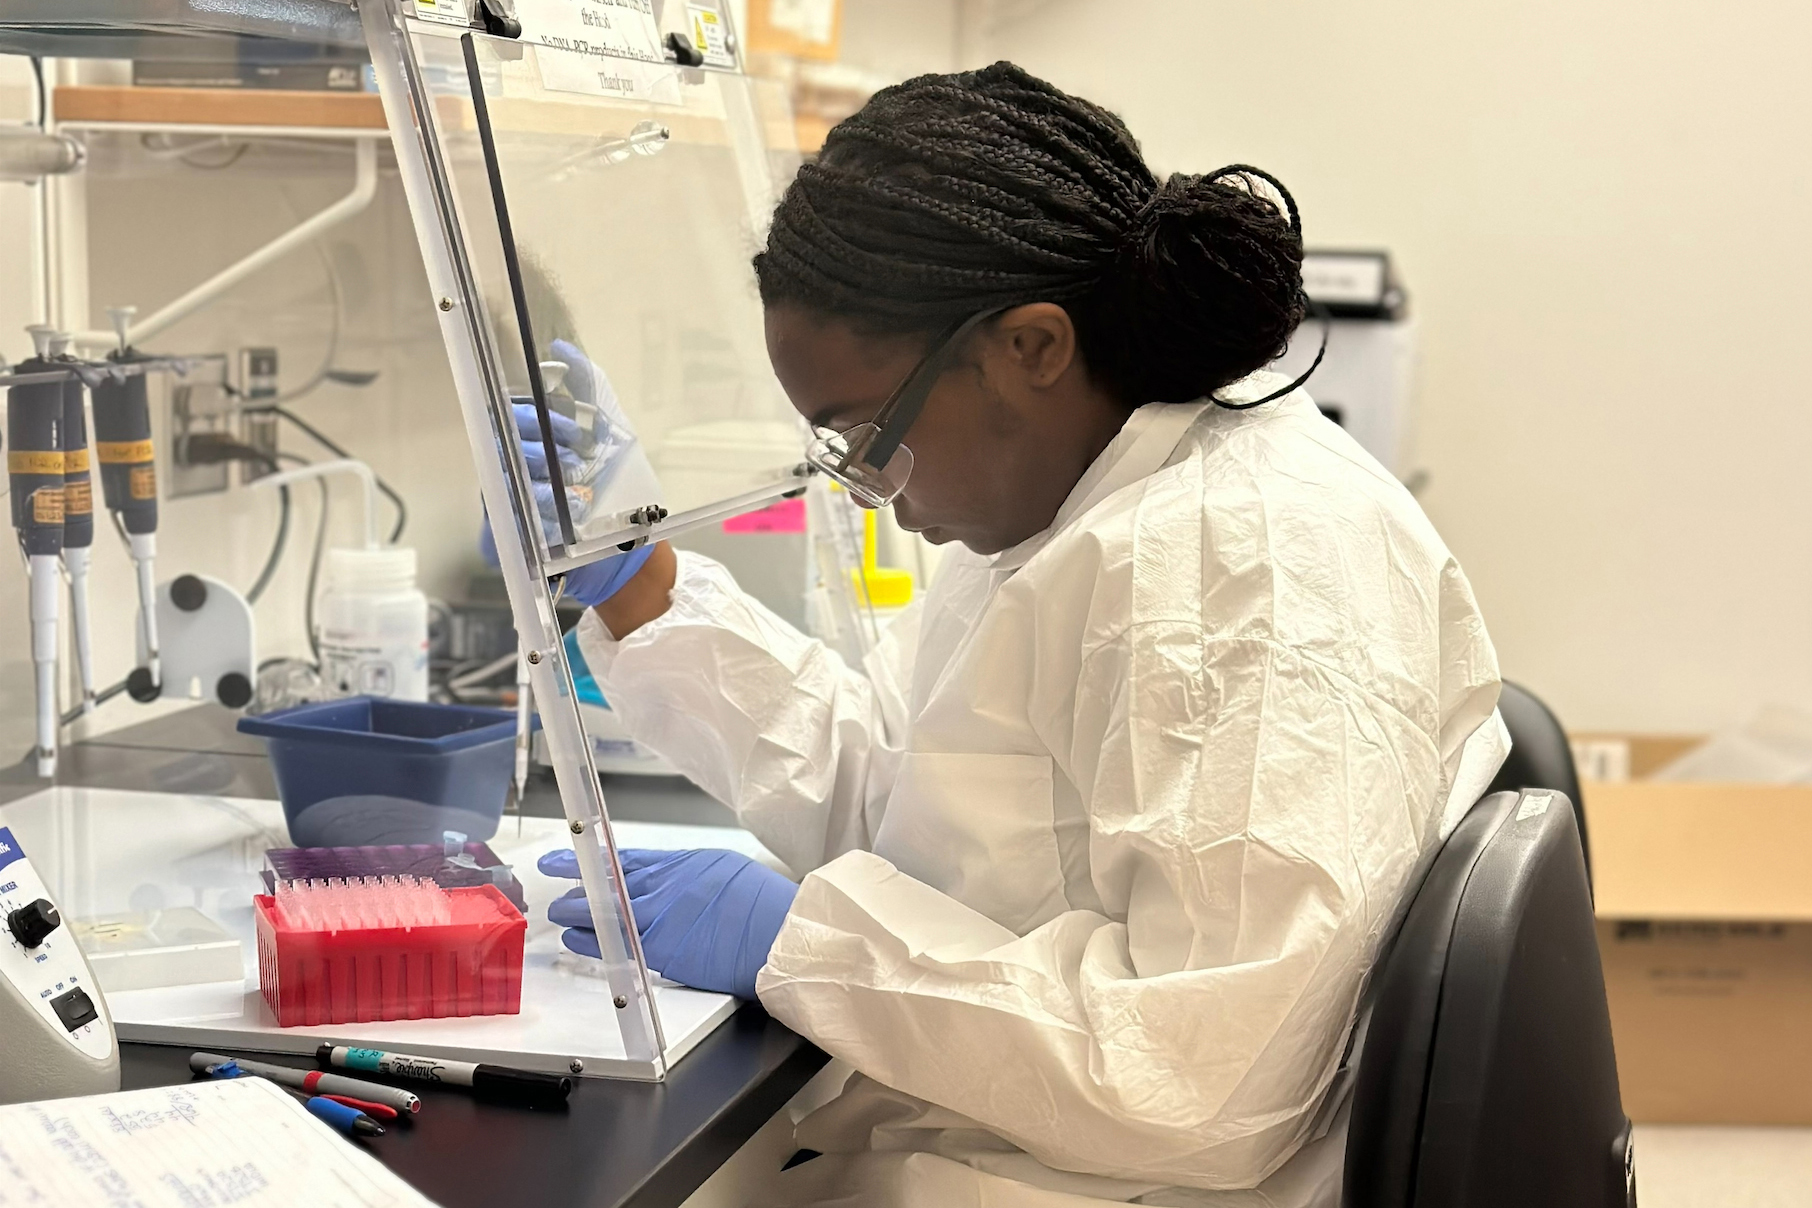 JeNiyah Scaife, an intern at the CDC’s Division of Vector-Borne Diseases, works in a lab on a new test that will help to detect a species of mosquito that can carry malaria. Credit: CDC